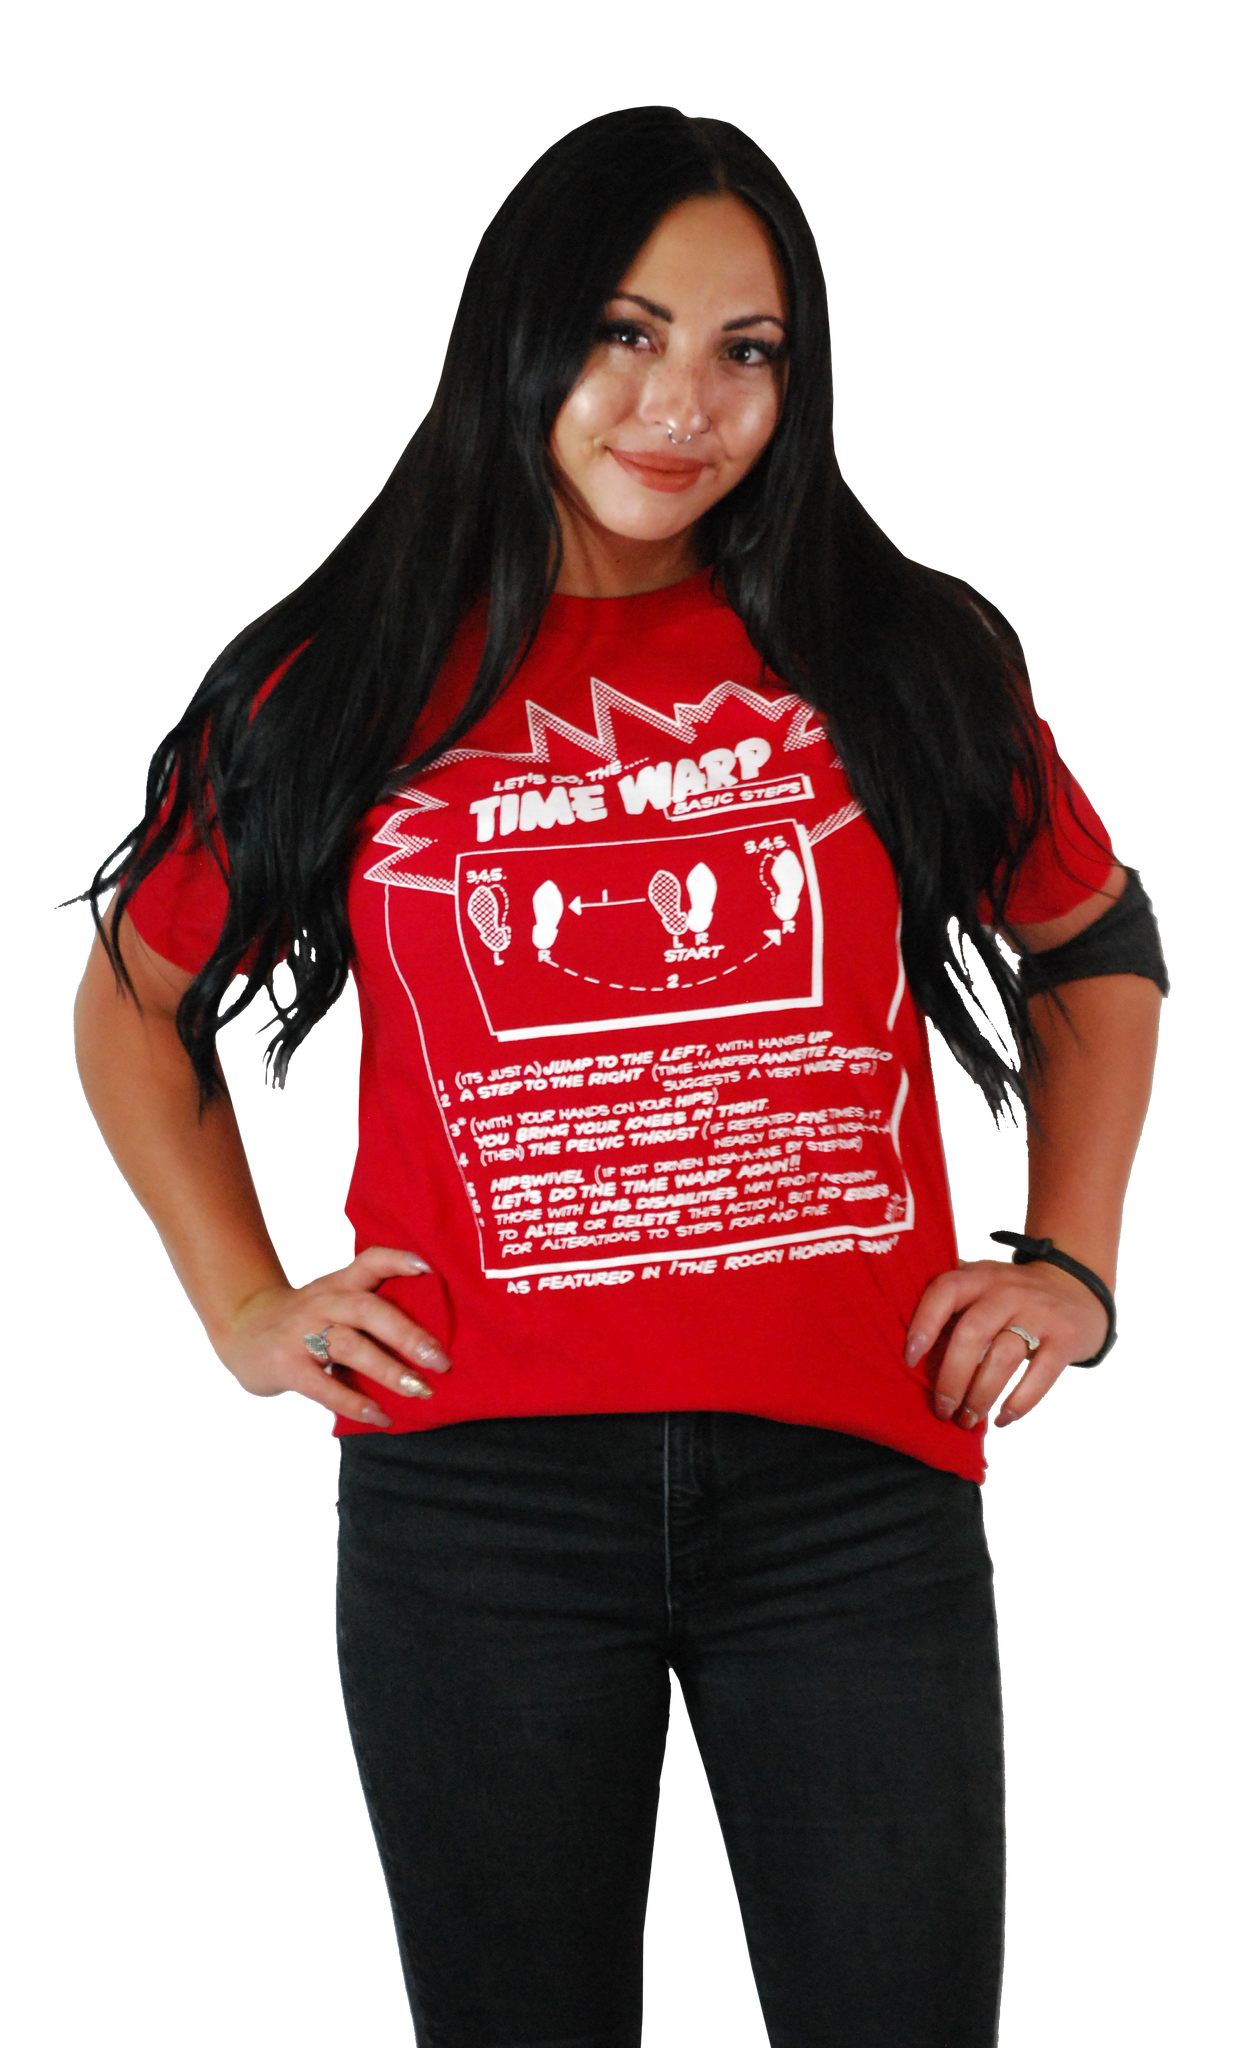 ROCKY HORROR PICTURE SHOW "TIME WARP" RED T-SHIRT